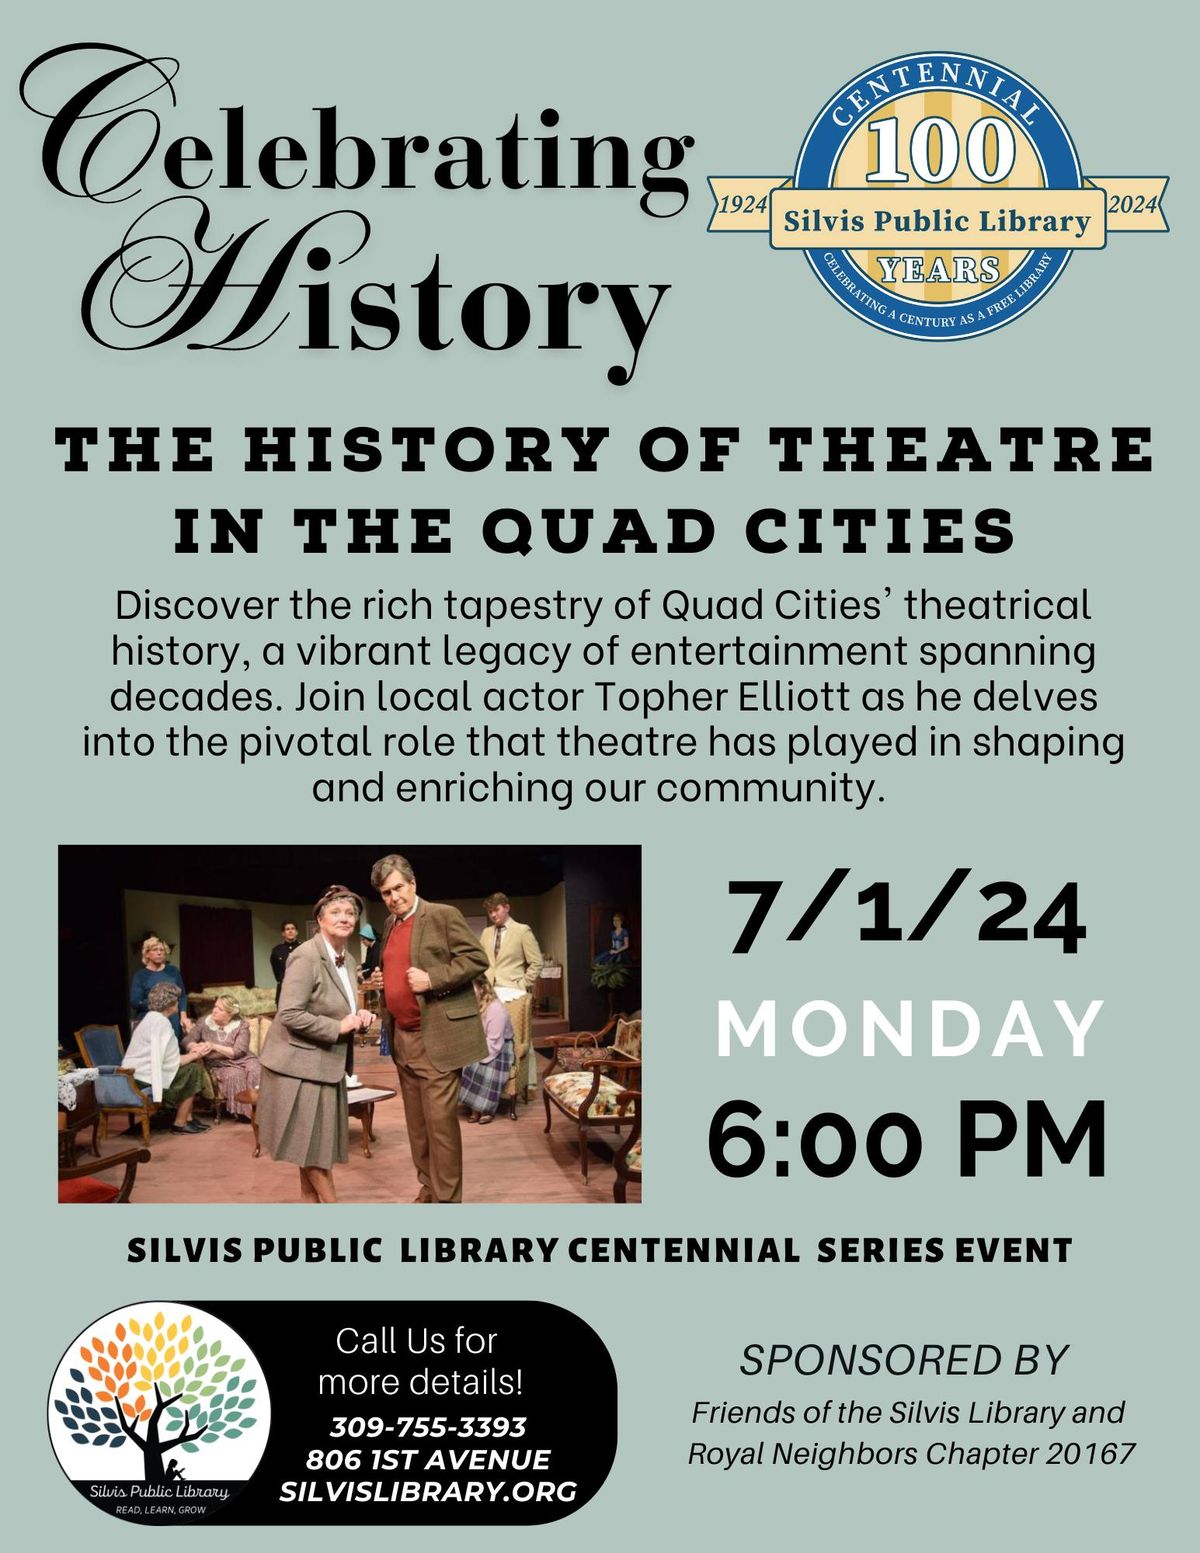 Celebrating History: The History of Theatre in the Quad Cities